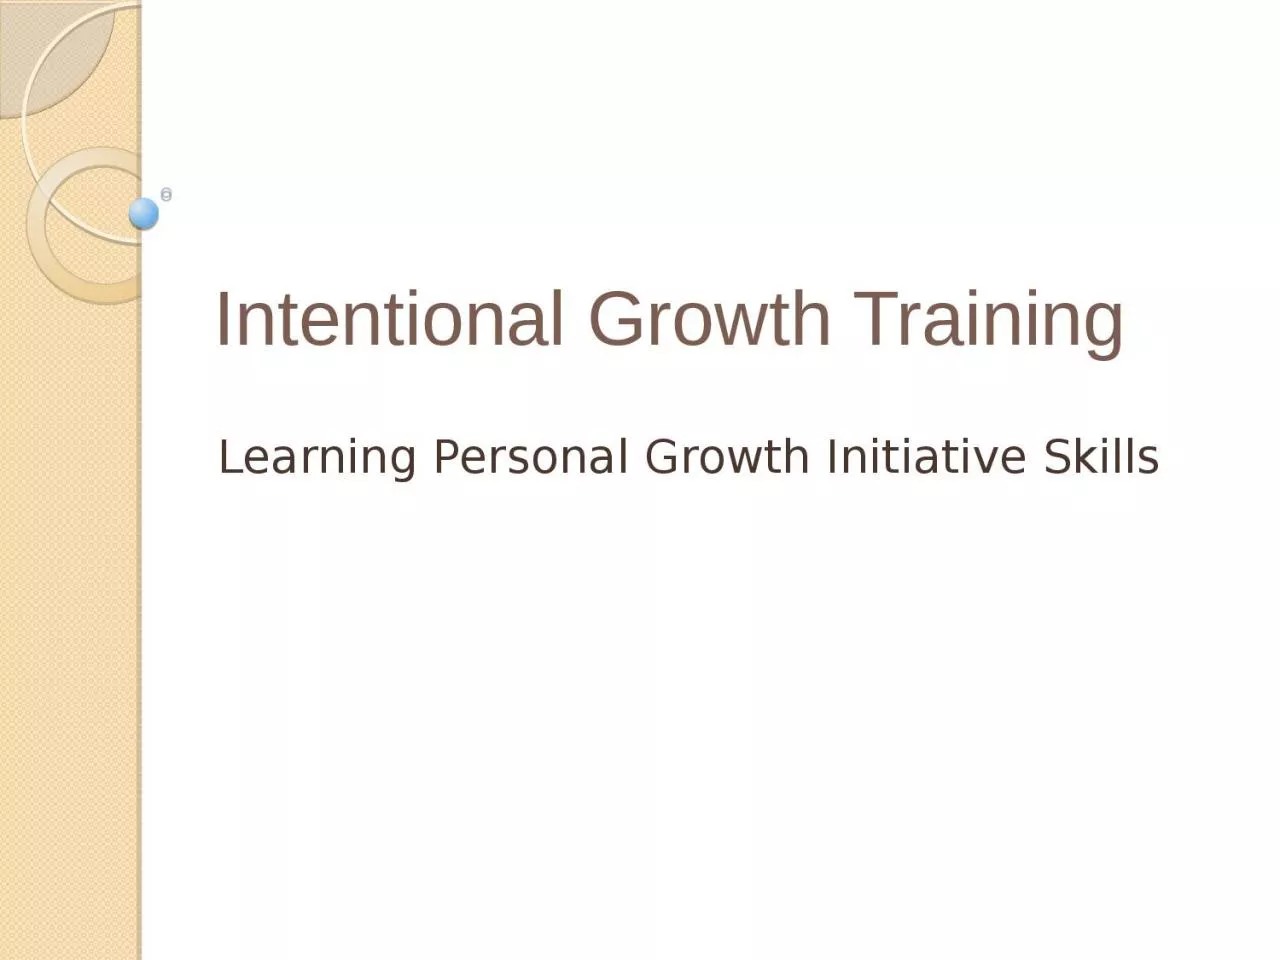 Intentional Growth Training